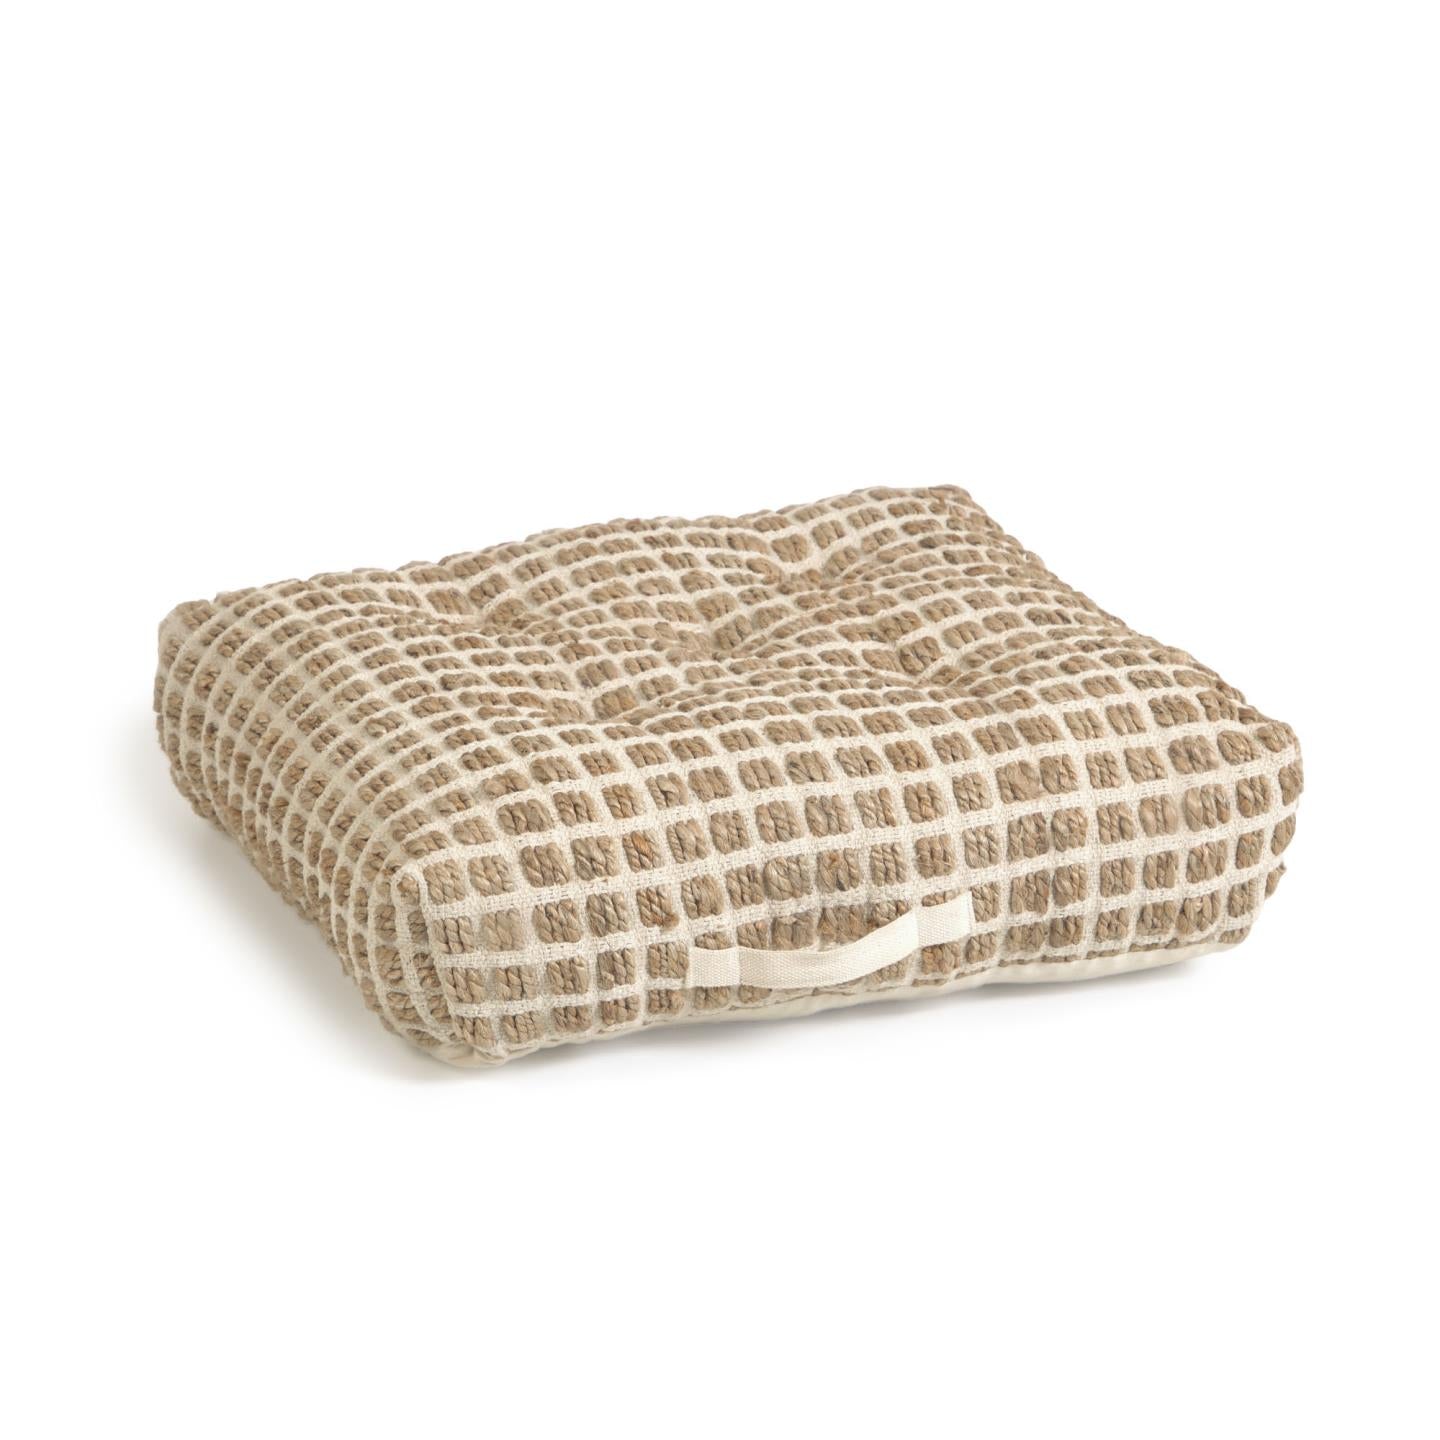 Jute and white natural cotton floor-pallet cushion Adelma 63 x 63 cm